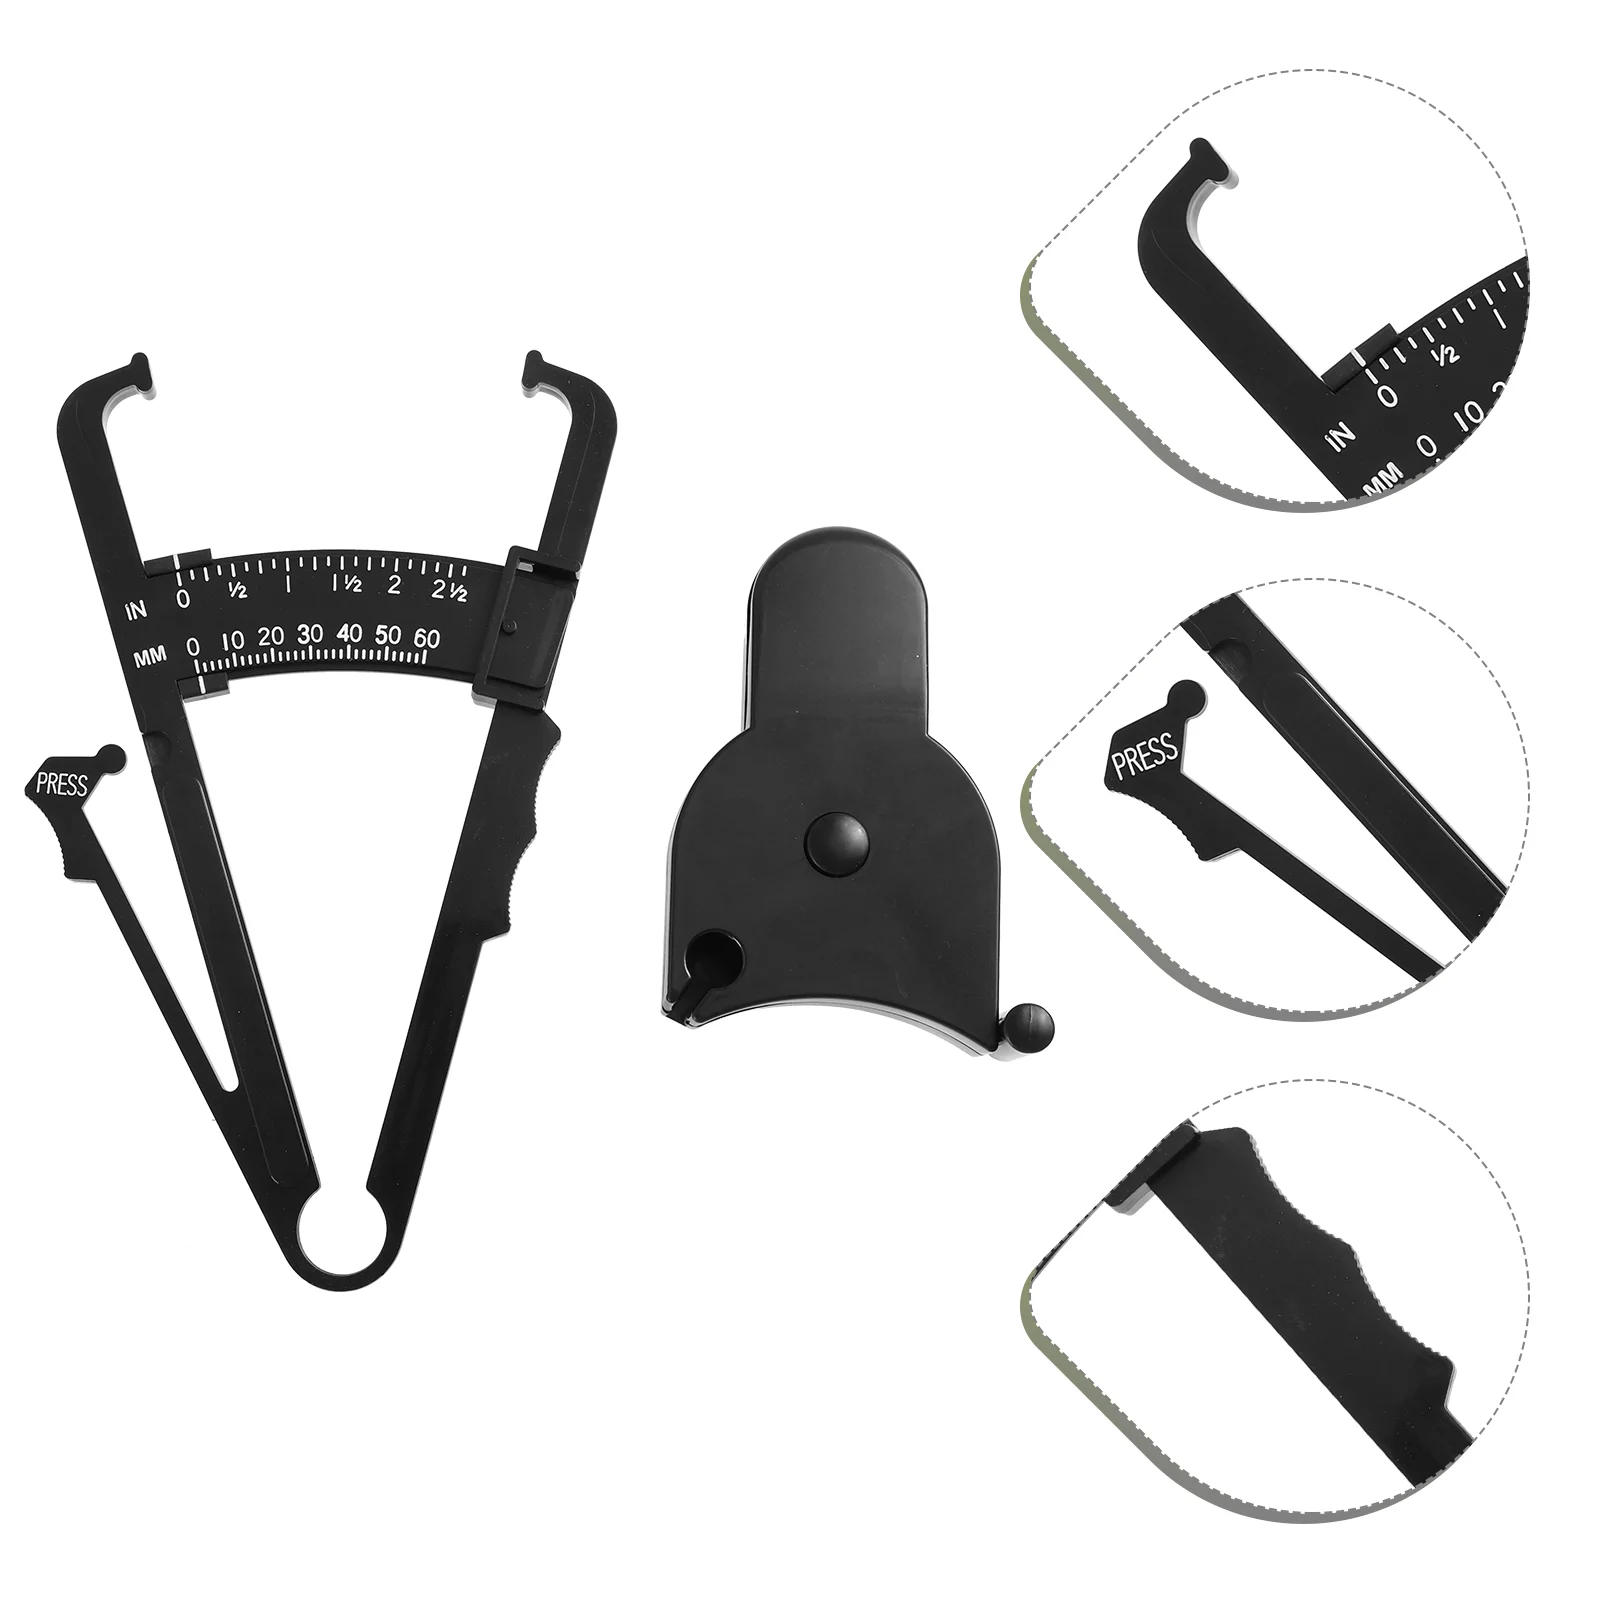 

Body Fat Caliper Personal Body Skinfold Test Weight Loss Calculator Fitness Measurement Tools for Men Keep Health Meter